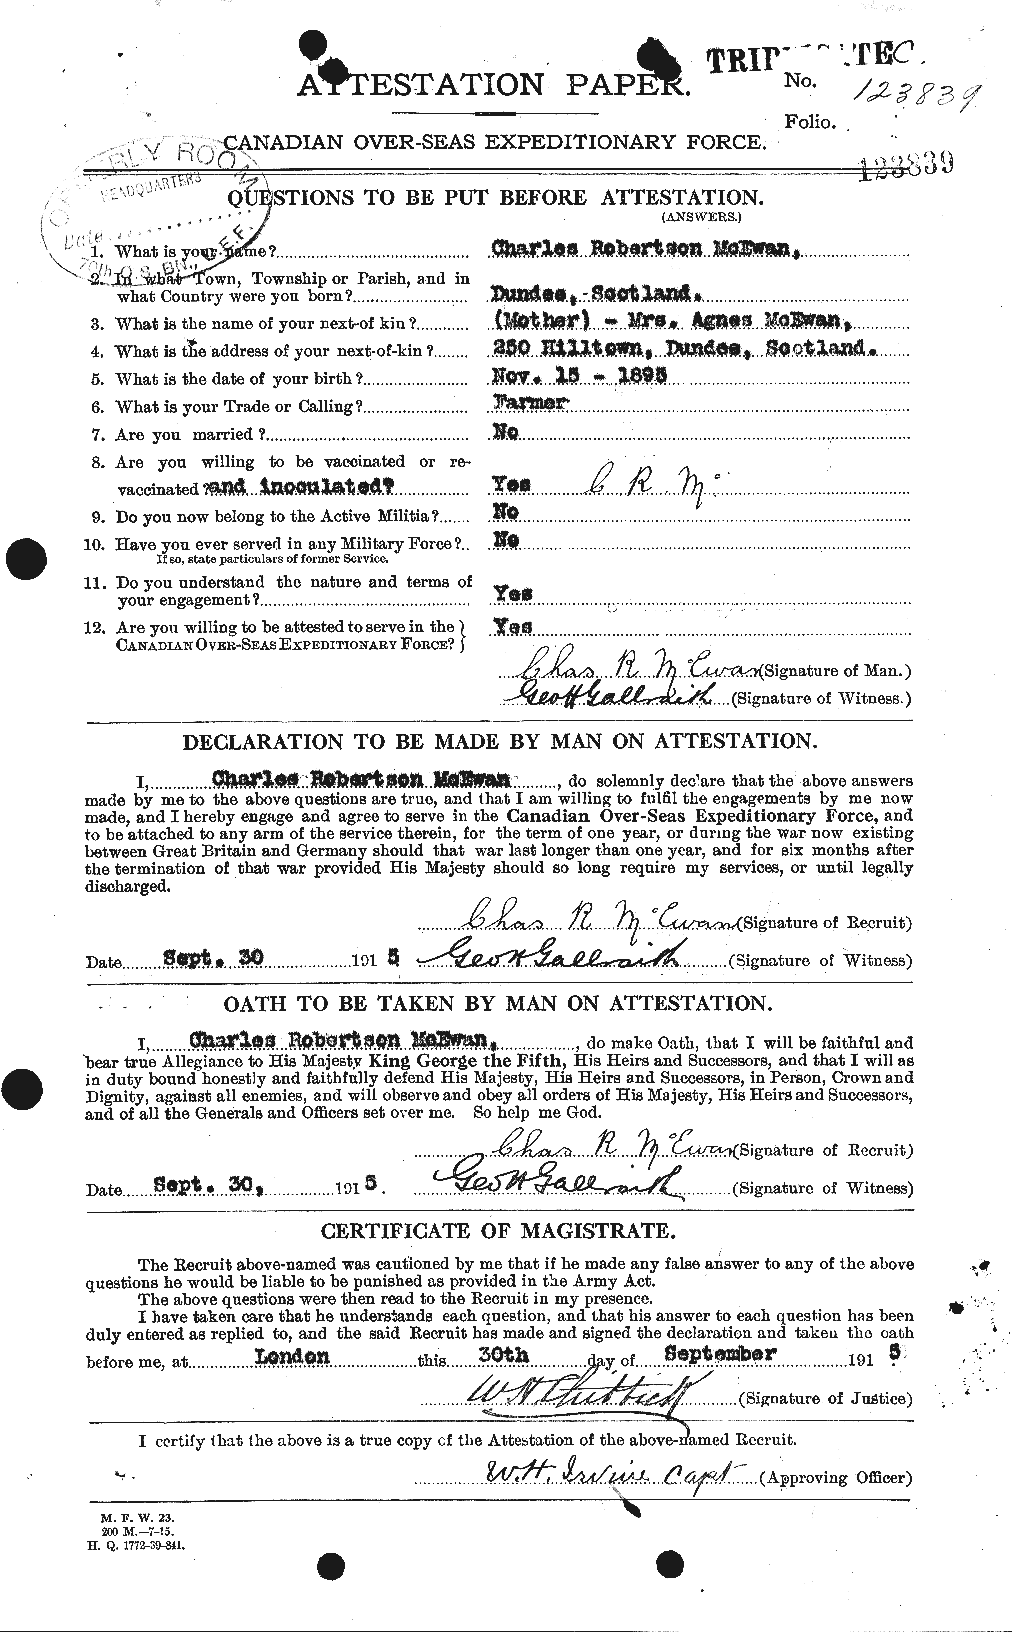 Personnel Records of the First World War - CEF 522199a